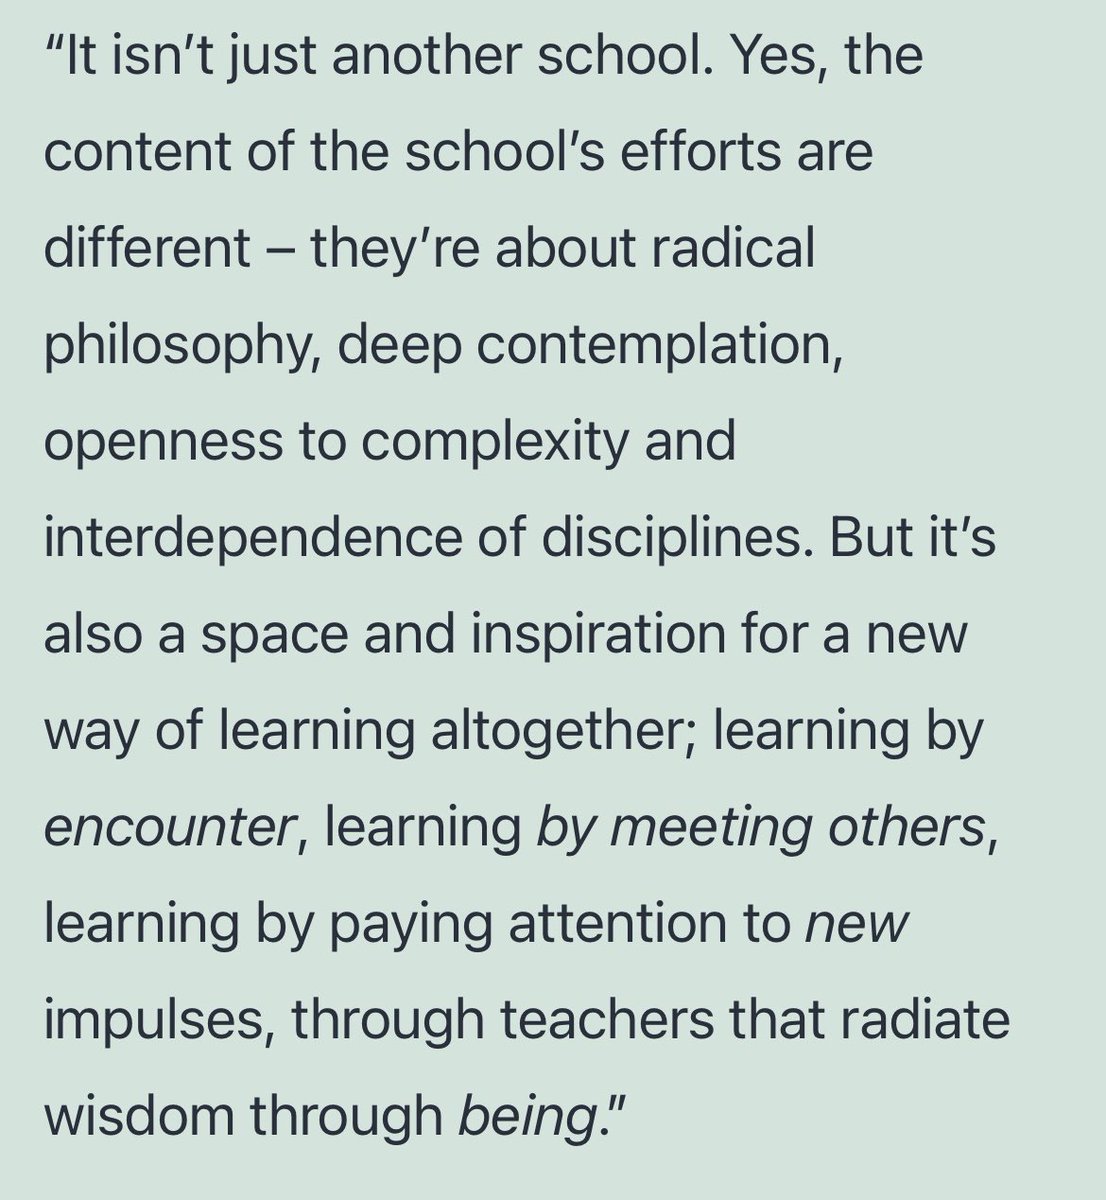 Honored to have my podcast featured on the Island School of Social Autonomy’s site - a radical philosophy learning initiative in Croatia developed by Franco “Bifo” Berardi, @HorvatSrecko, @pamelaanderson and others. Learn more, listen, support the school: issa-school.org/news/good-life…